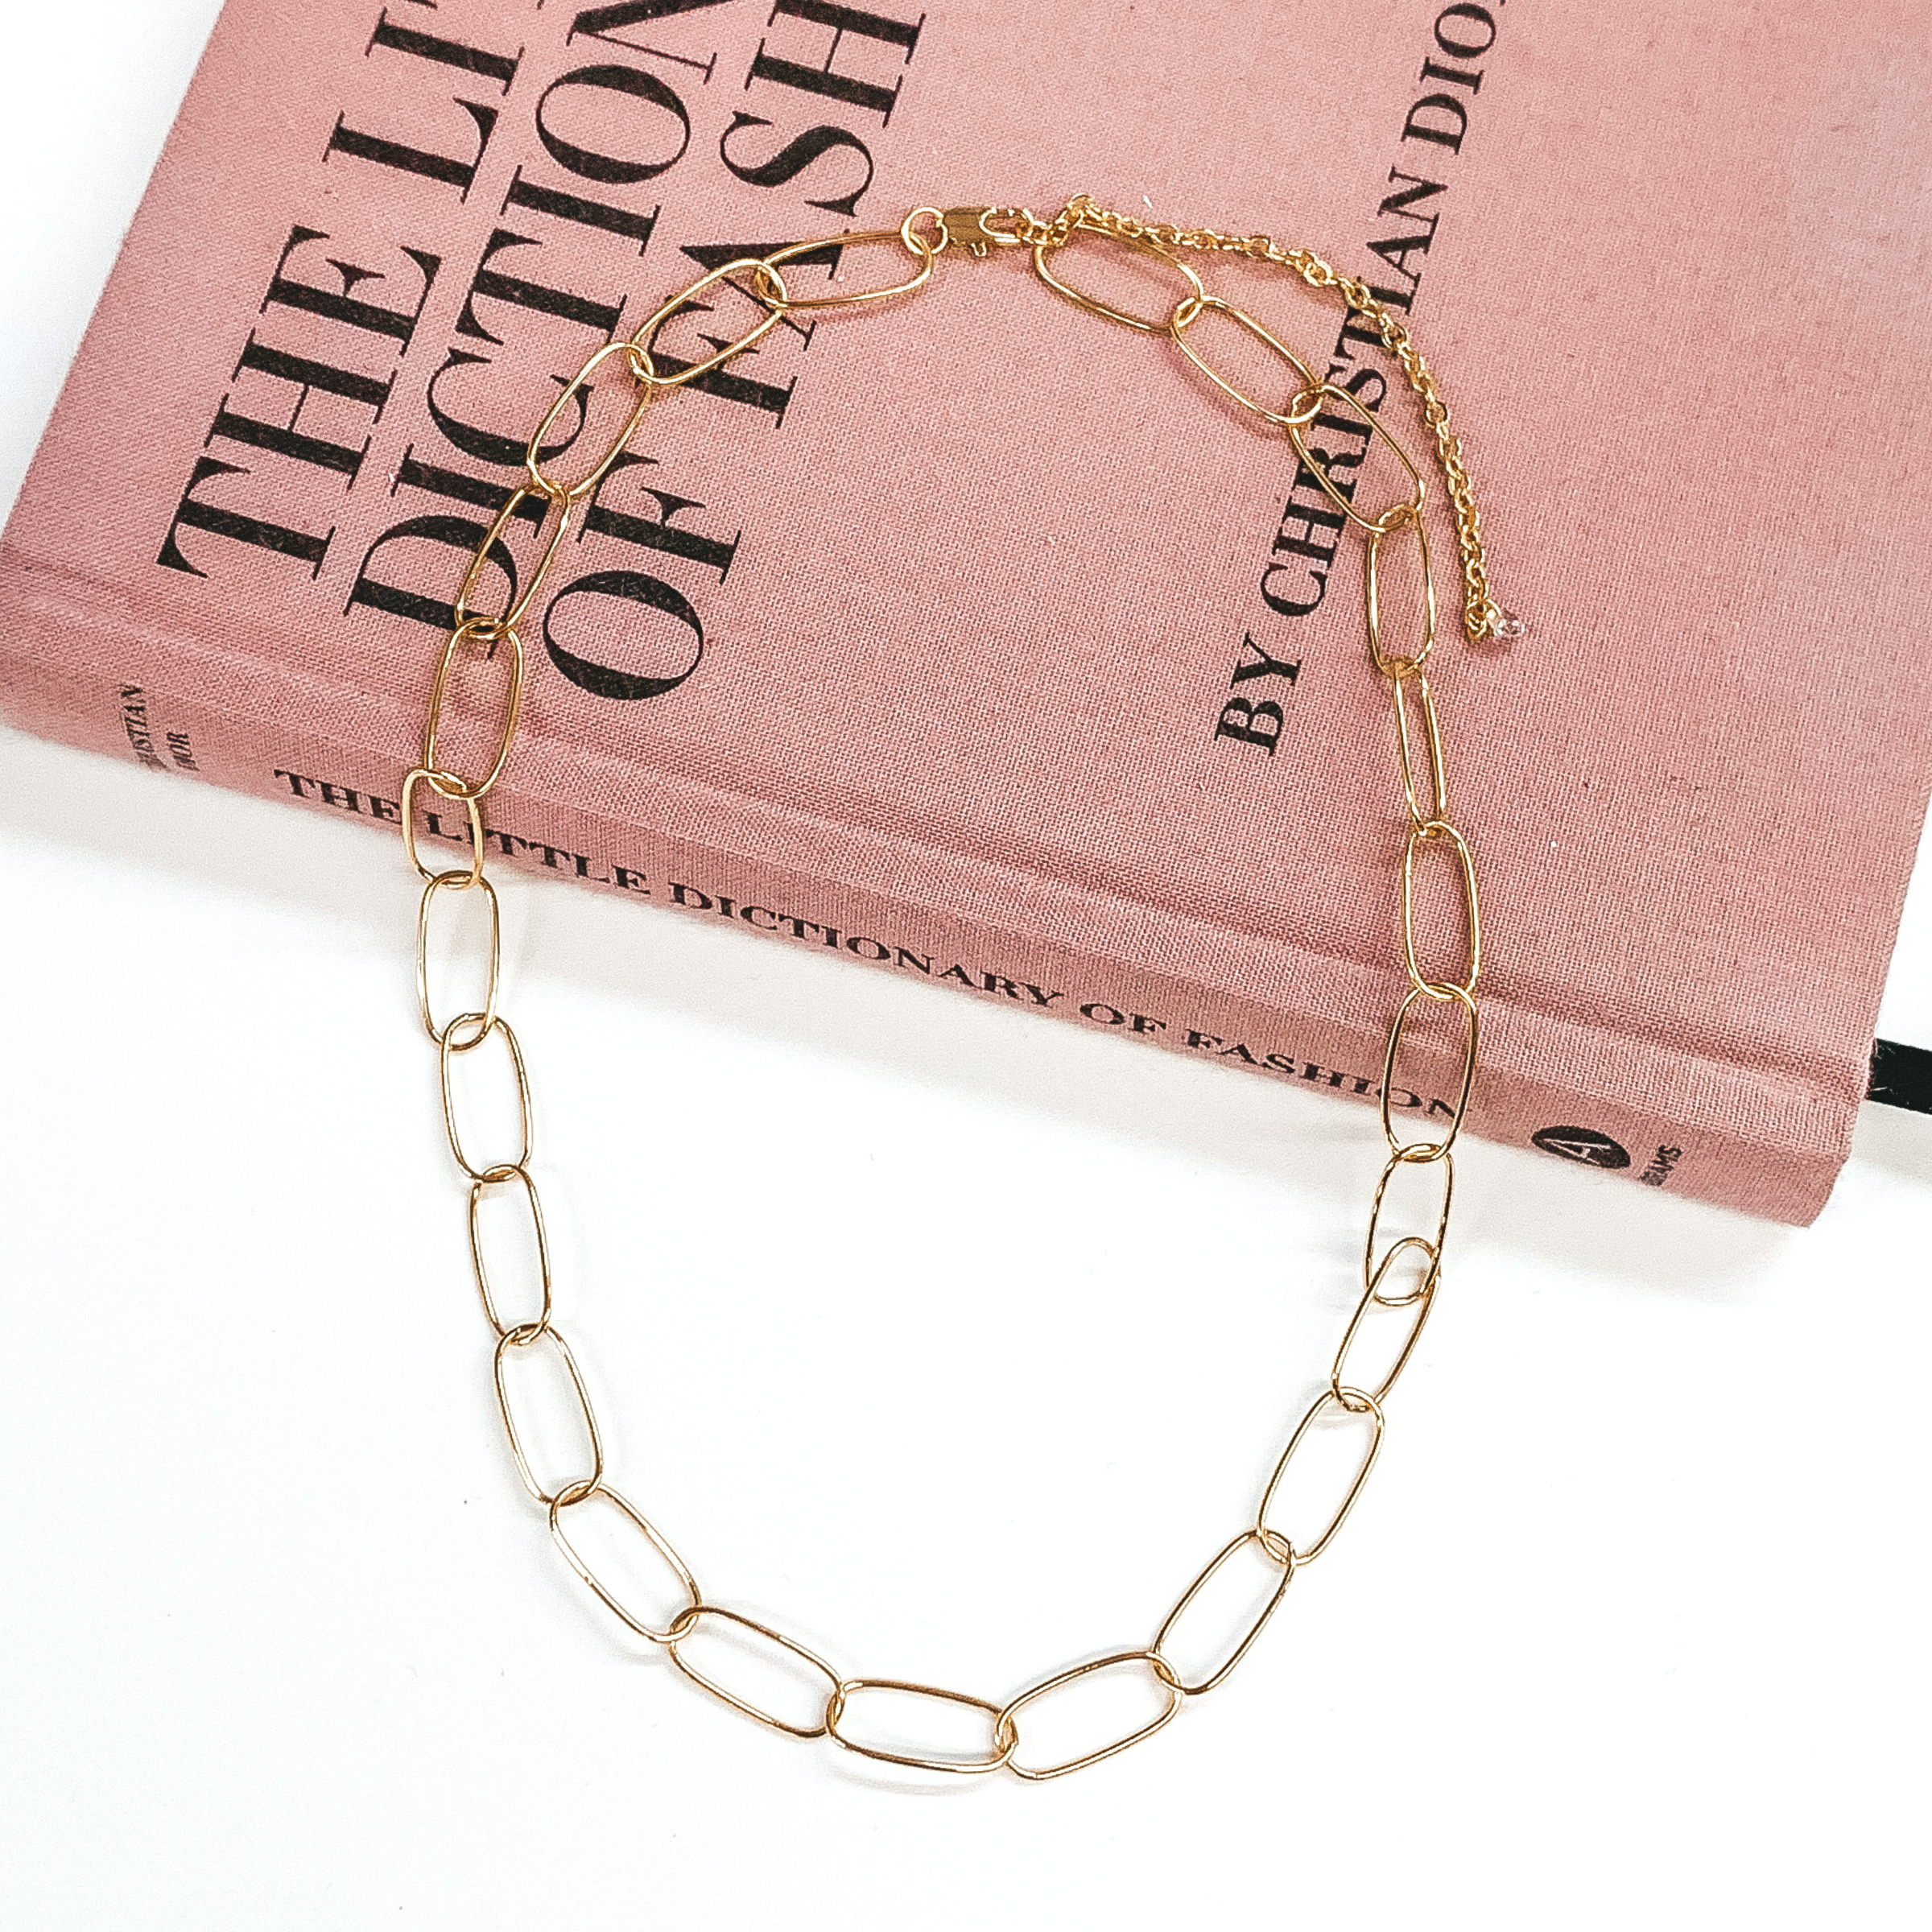 Thin, paperclip chain in gold. This necklace is pictured laying partially on a mauve colored book on a white background. 